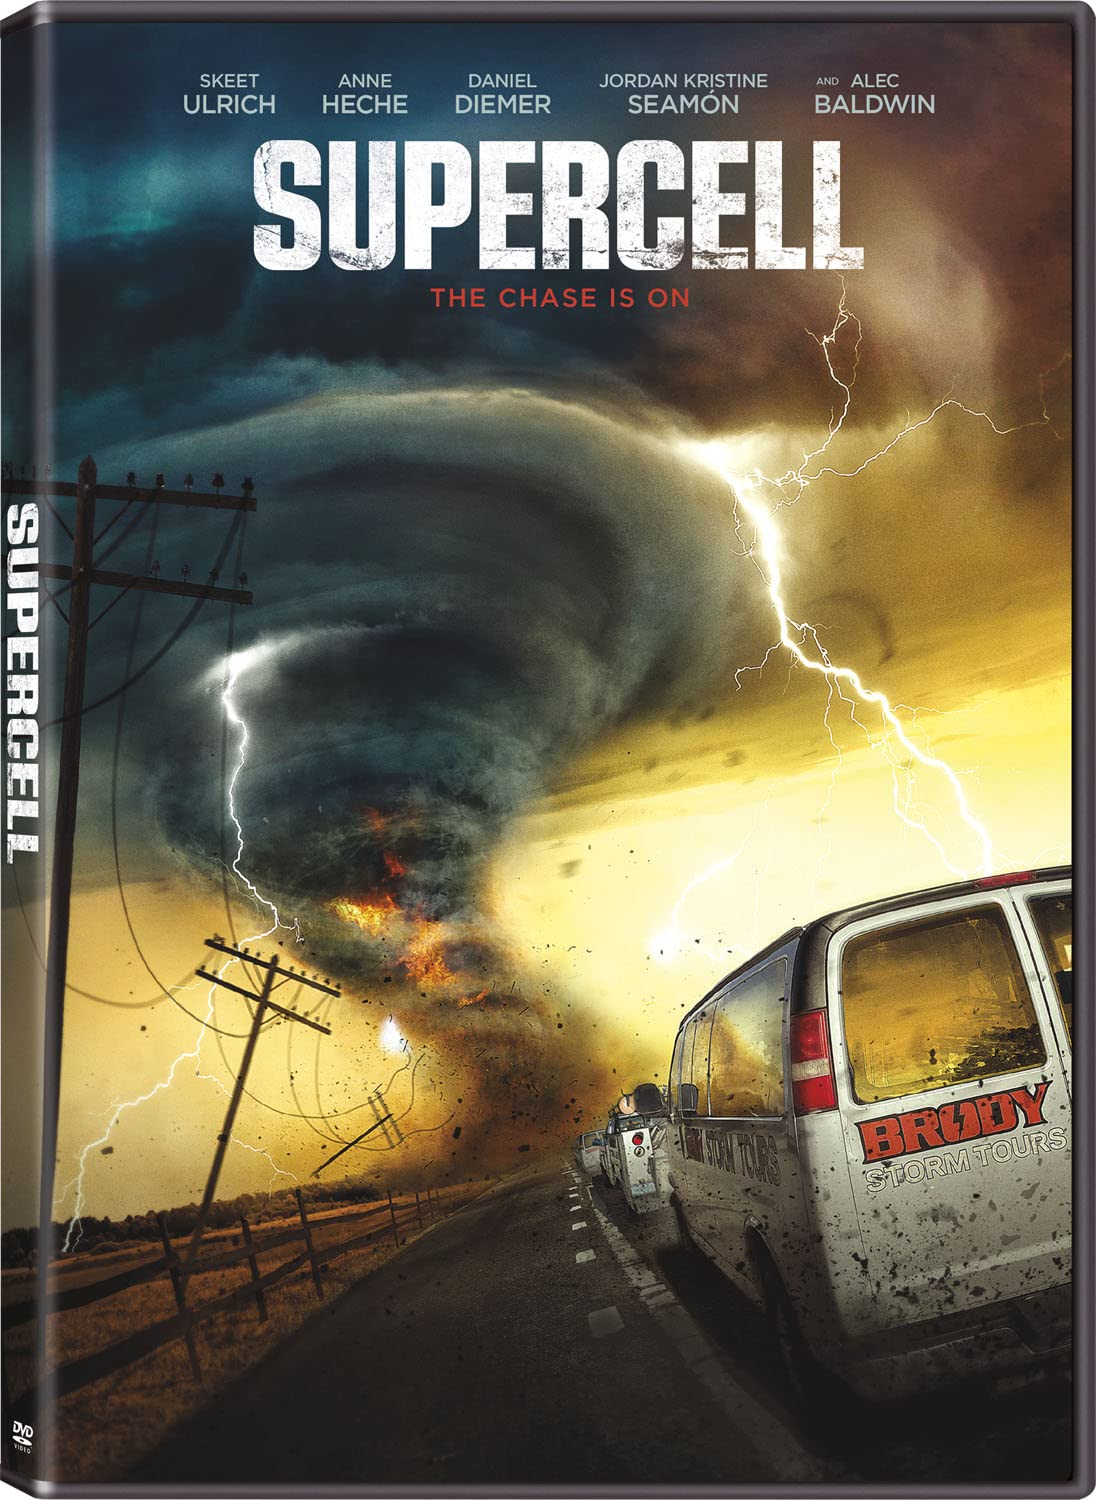 Image for "Supercell"